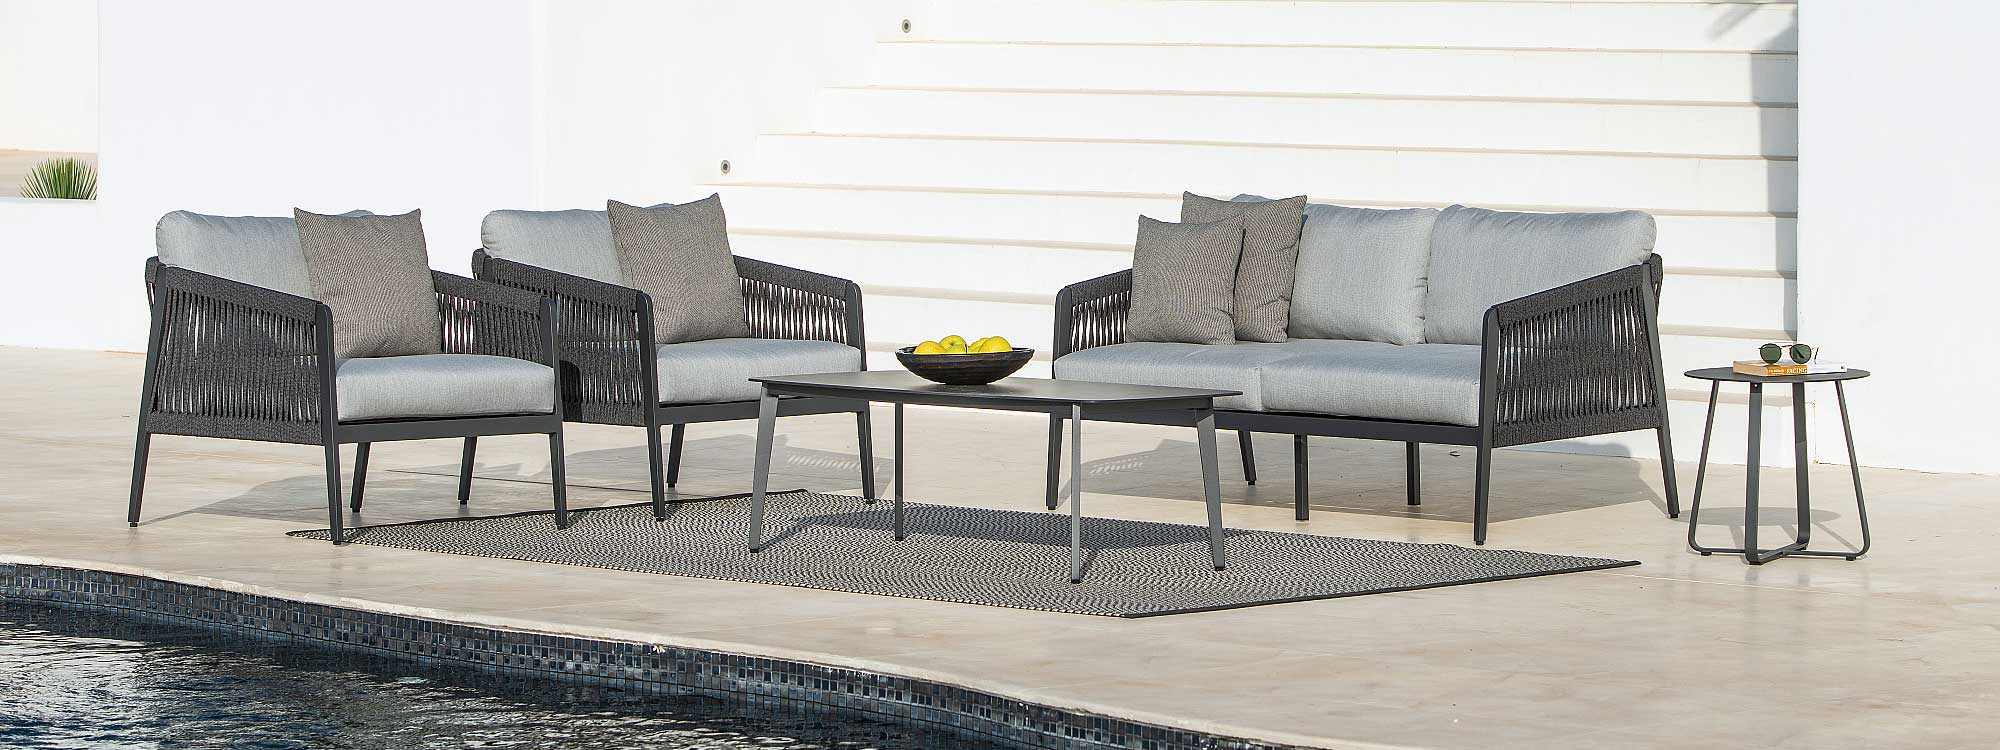 Image of Ritz charcoal coloured garden sofa & lounge chairs with light grey cushions with Ritz coffee table in the centre, shown on sunny poolside with whitewashed flight of stairs and wall in the background